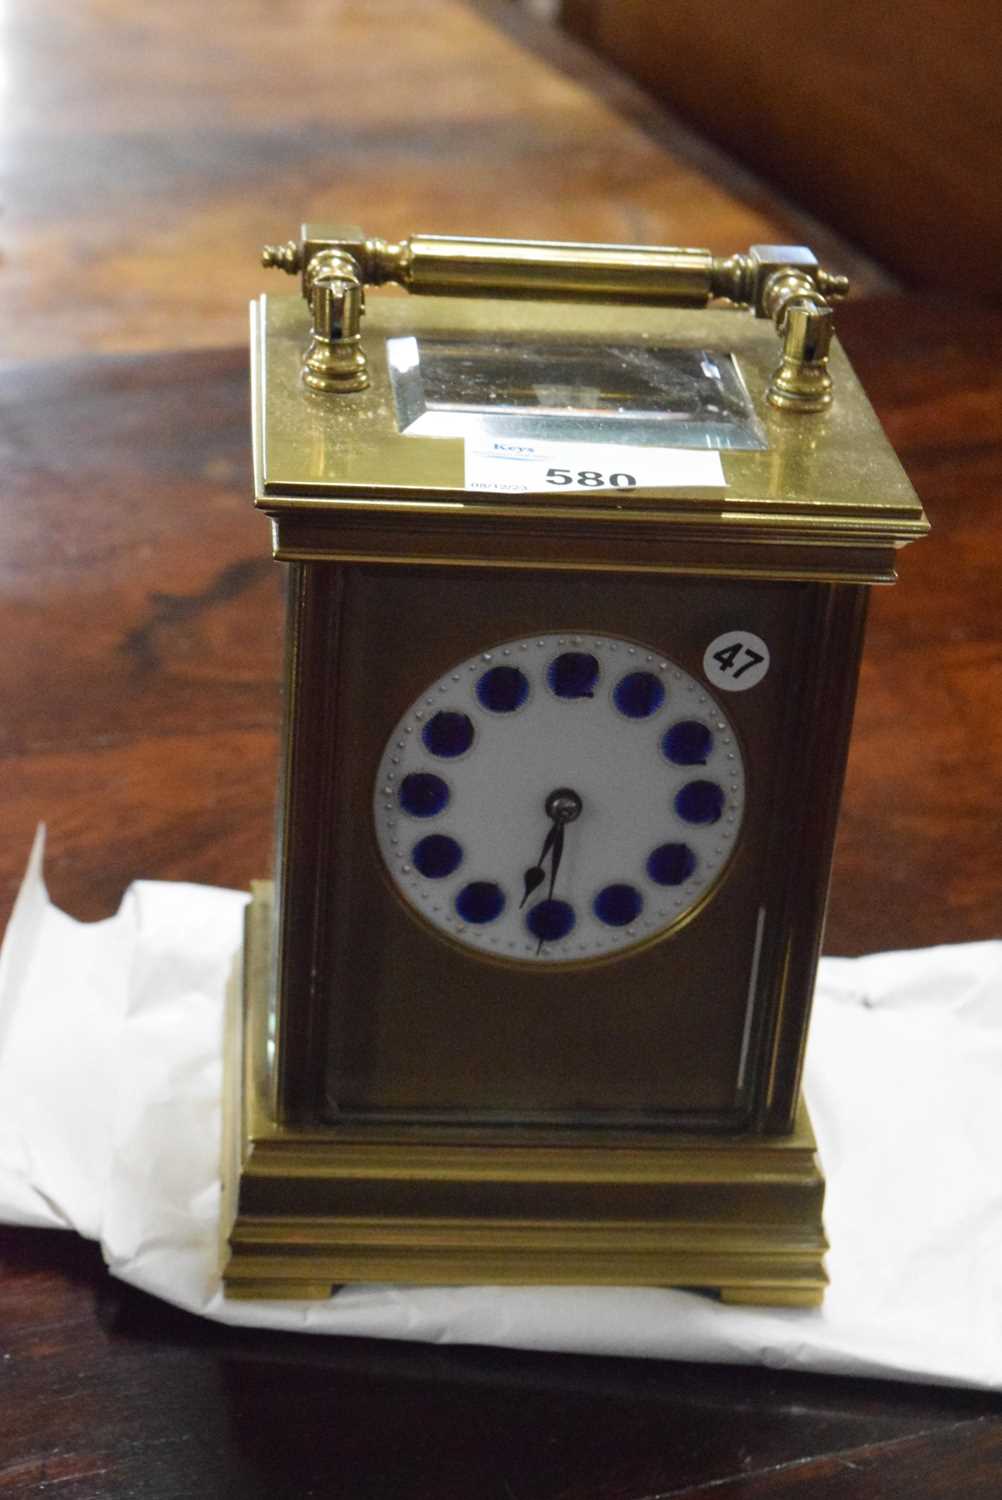 Late 19th or early 20th Century brass cased carriage clock with white and blue enamel dial with